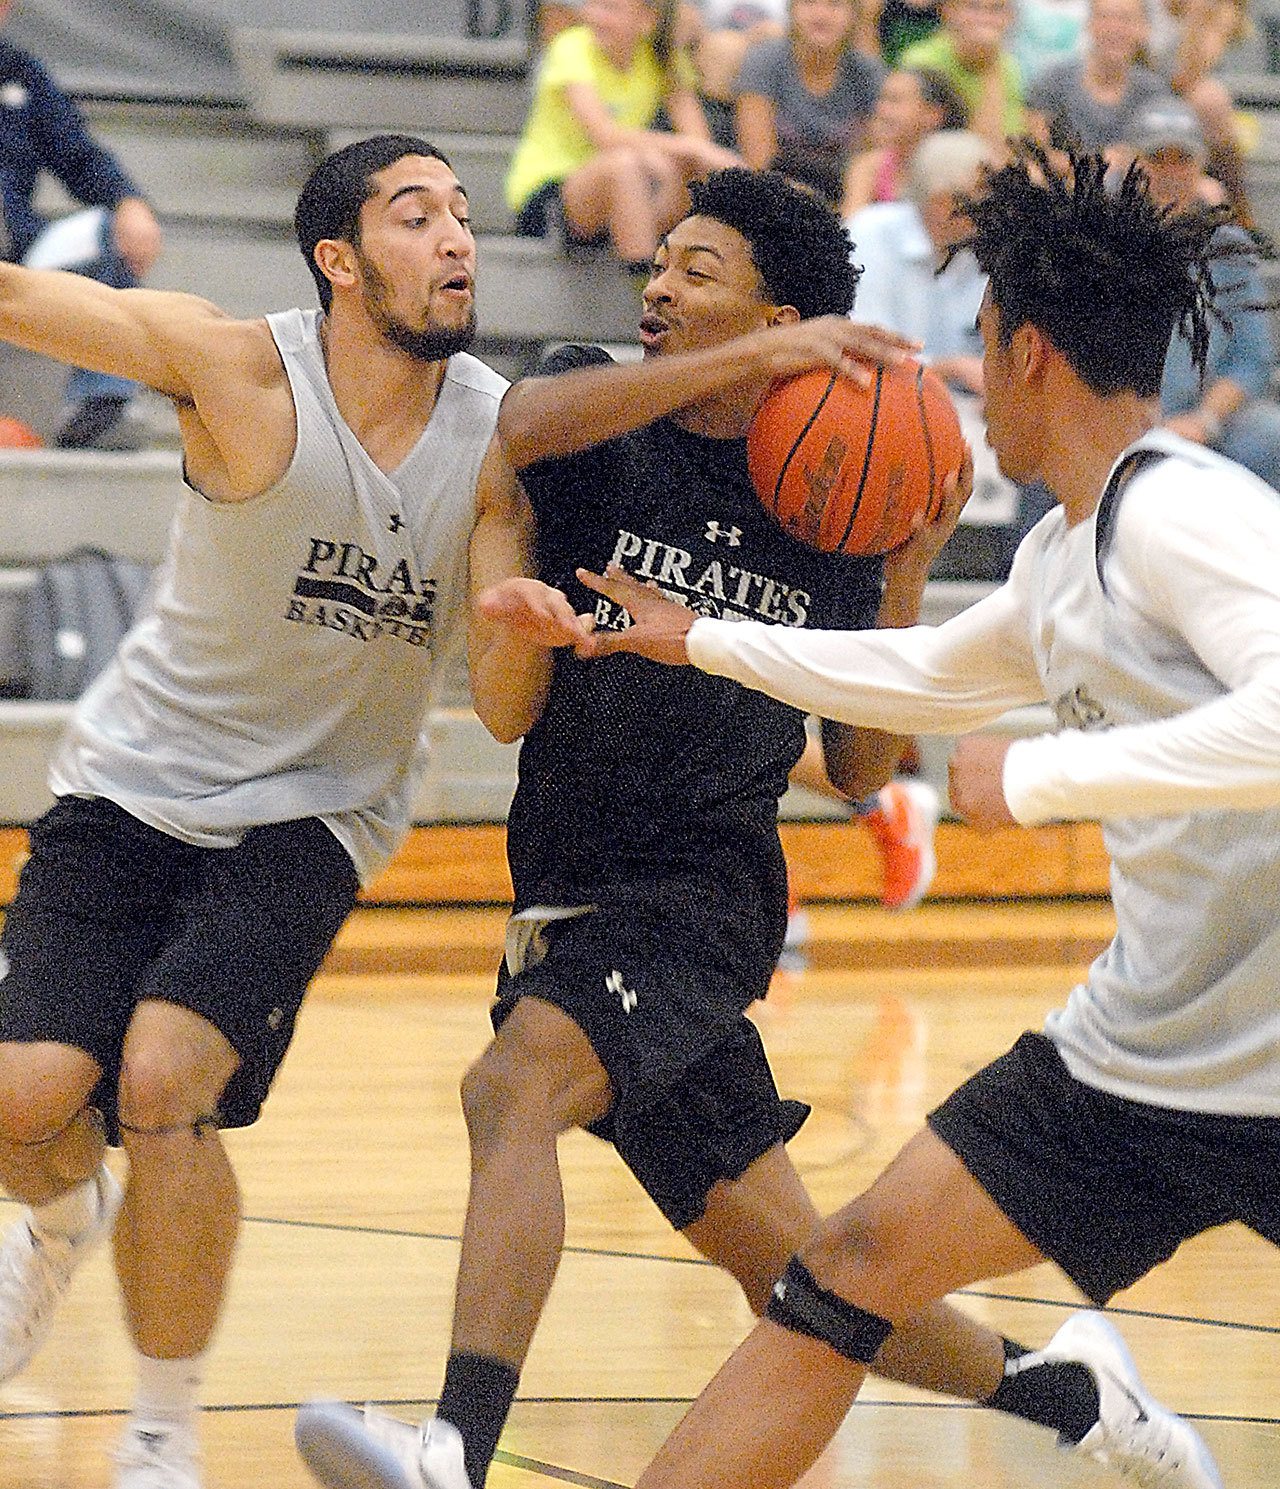 Keith Thorpe/Peninsula Daily News Peninsula College mens team players, from left, Jarod Felix, Elijah Williams and Zach Day, take part in an intrasquad scrimmage on Friday night on their home court in Port Angeles.